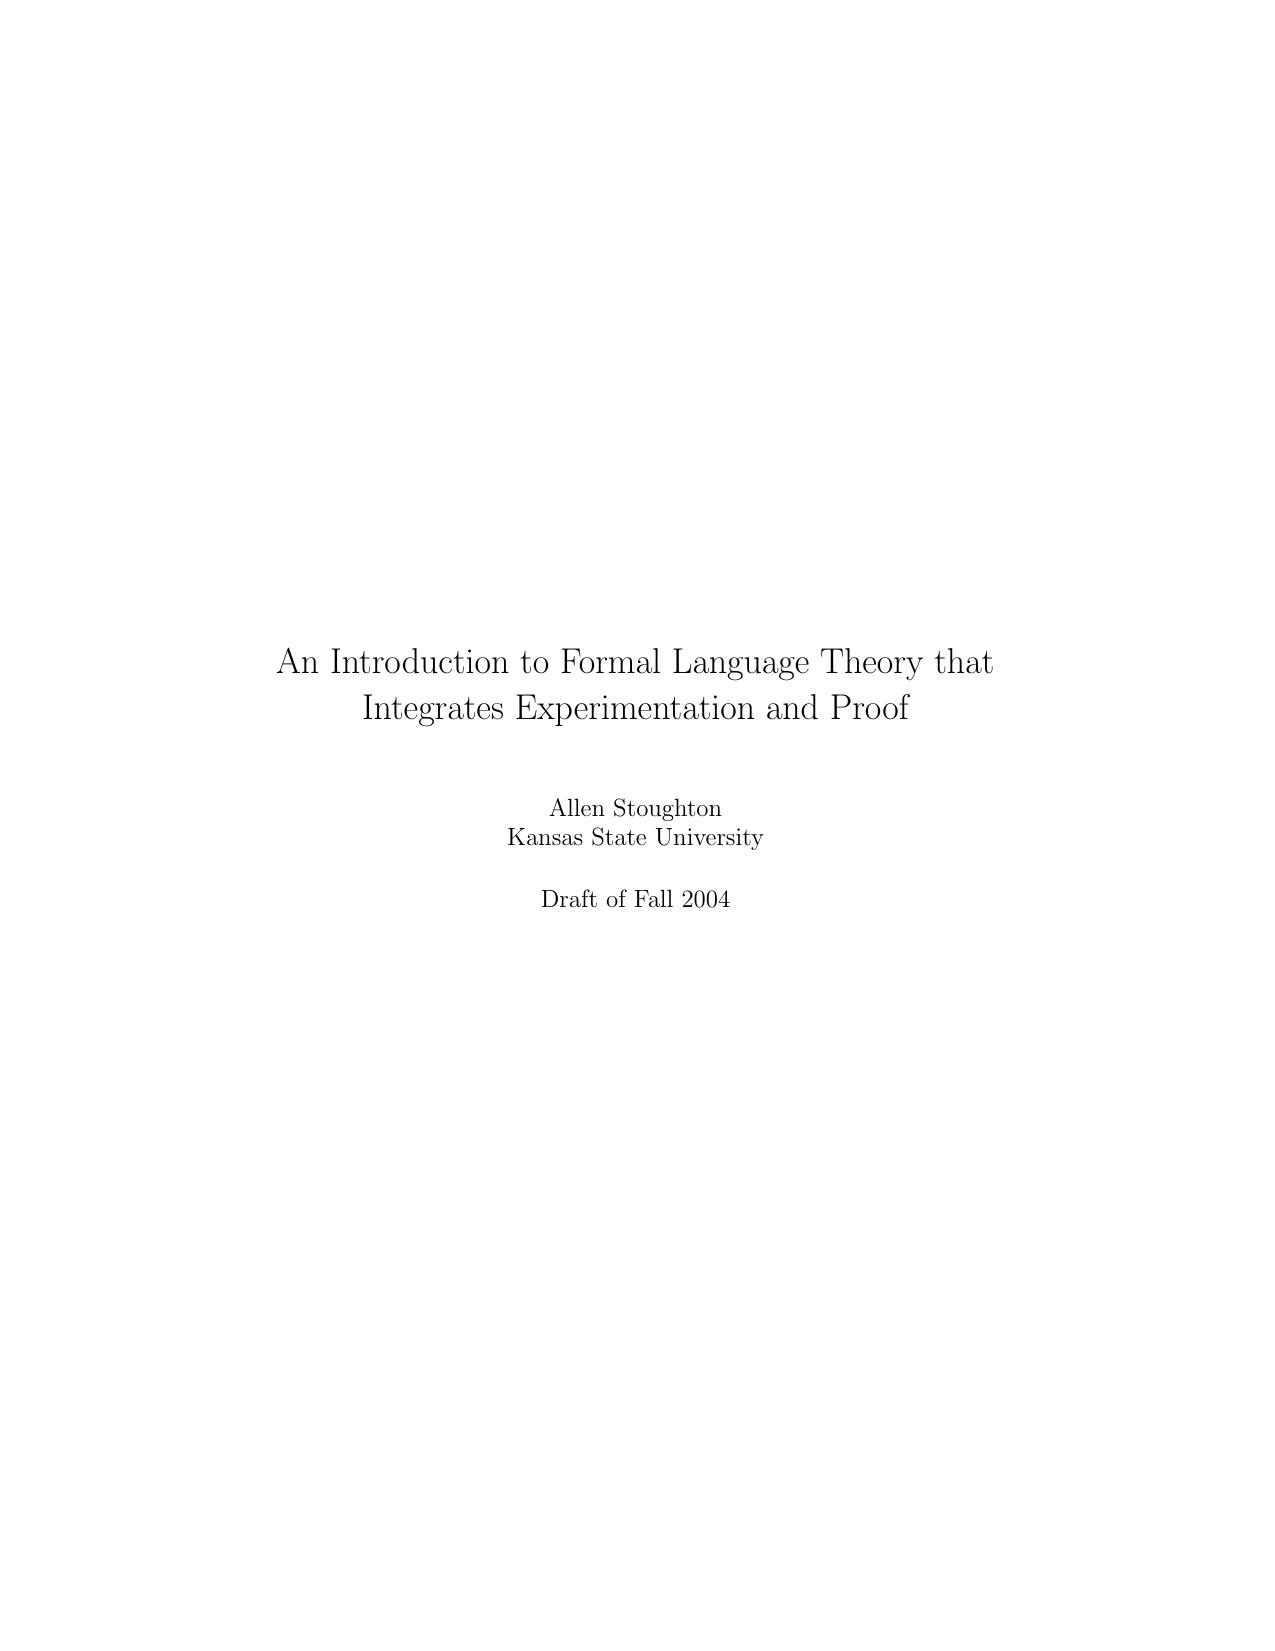 An Introduction to Formal Language Theory that Integrates Experimentation and Proof